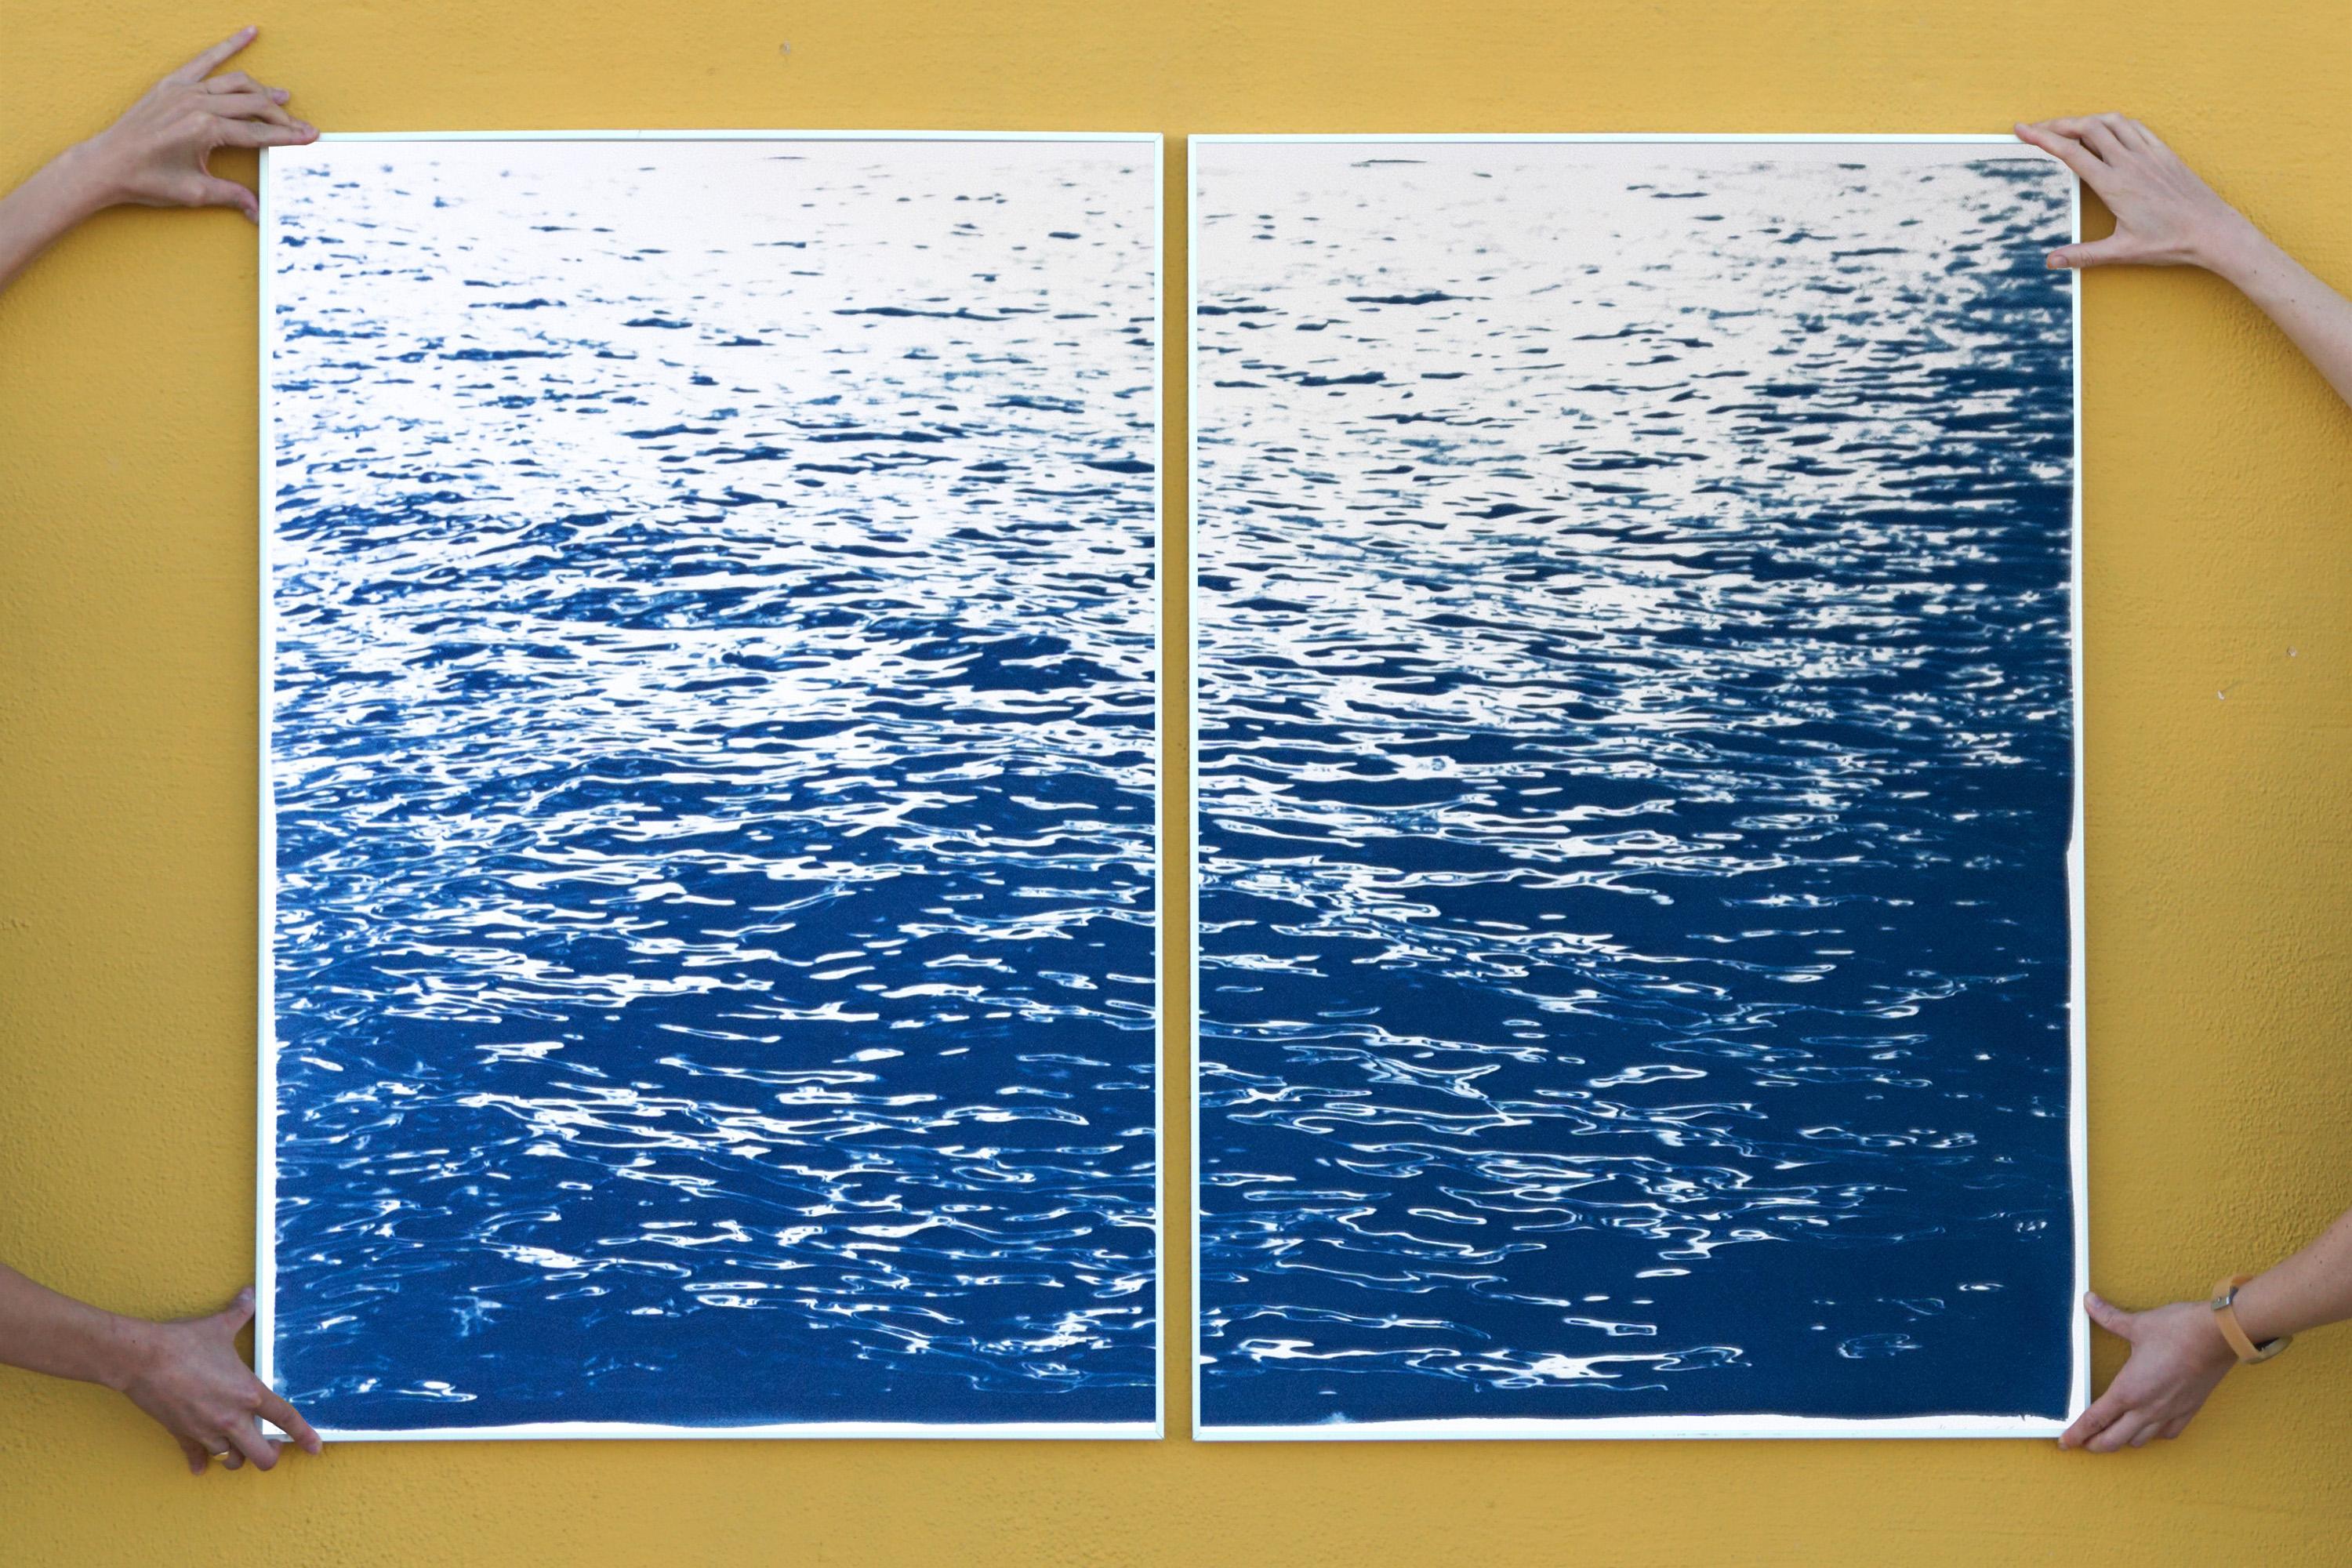 This is an exclusive handprinted limited edition cyanotype.

This beautiful diptych is titled 